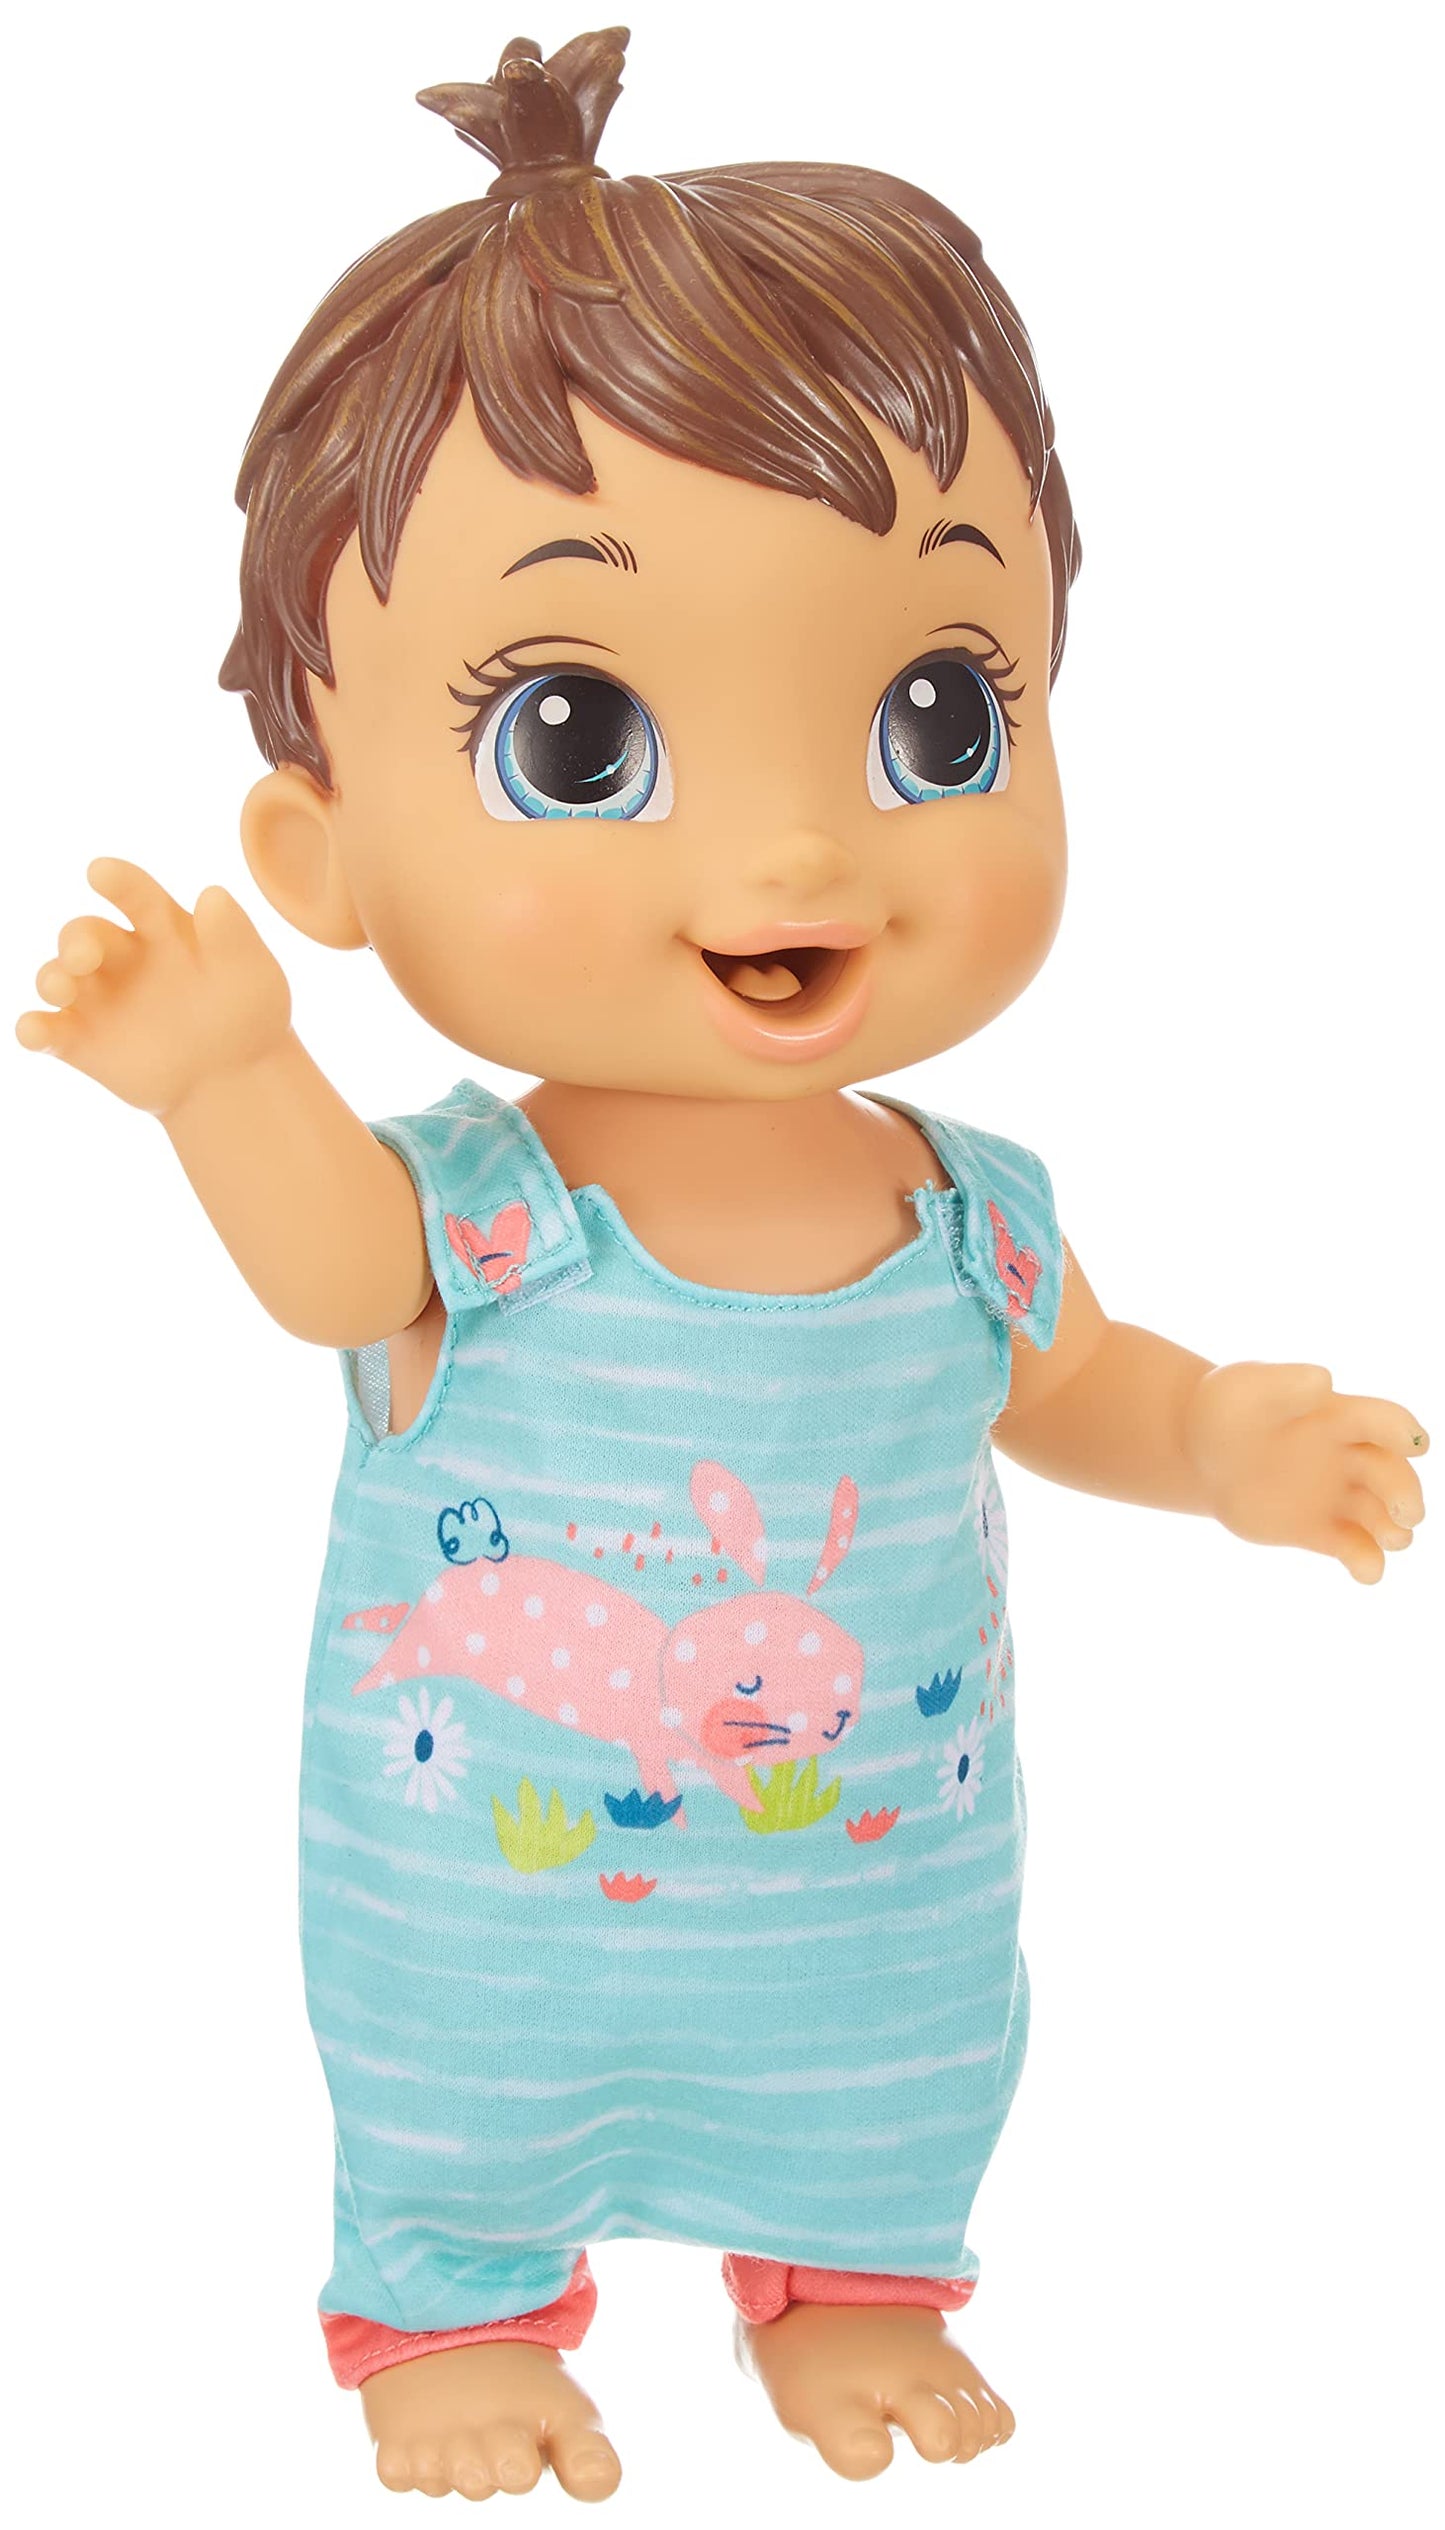 Baby Alive Baby Gotta Bounce Doll, Bunny Outfit, Bounces with 25+ SFX and Giggles, Drinks and Wets, Brown Hair Toy for Kids Ages 3 and Up